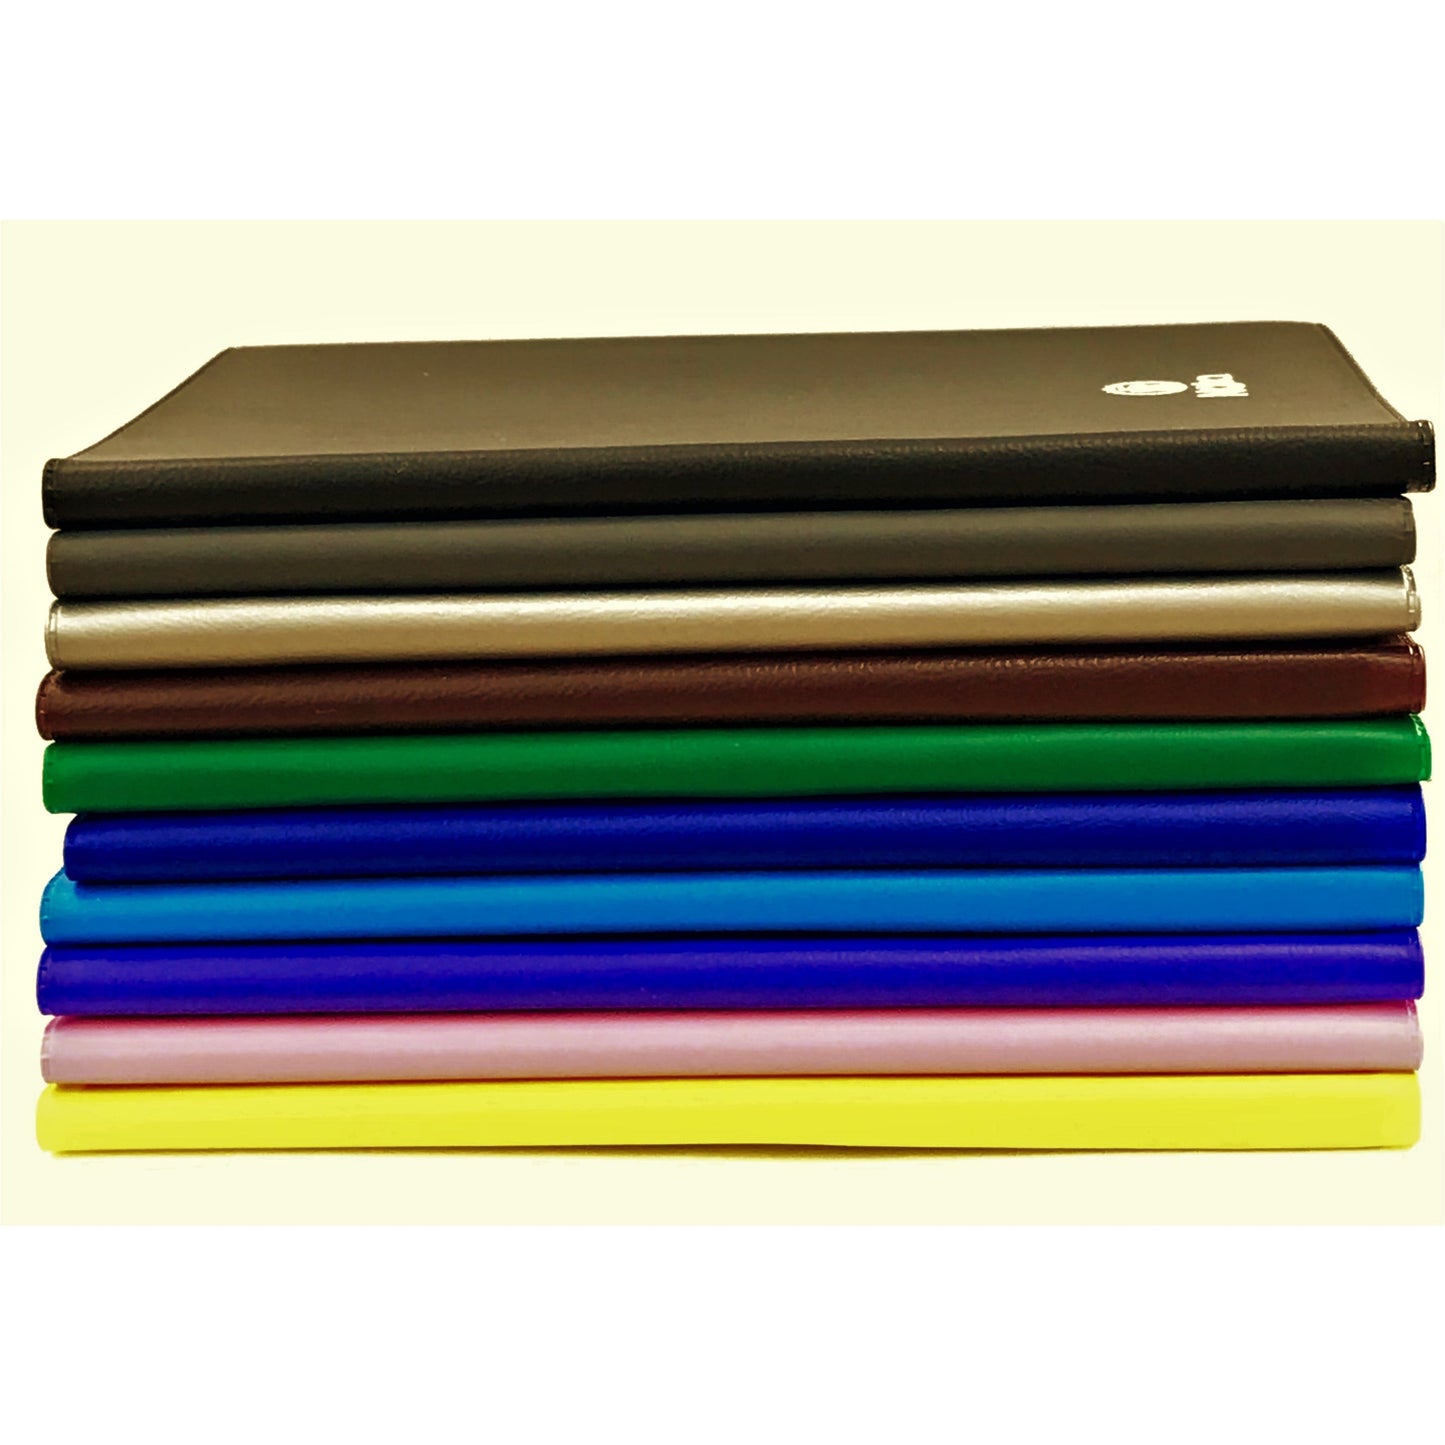 Bassile Nota Soft Cover Pocket Notebook 14x9.5 cm - Assorted Colors